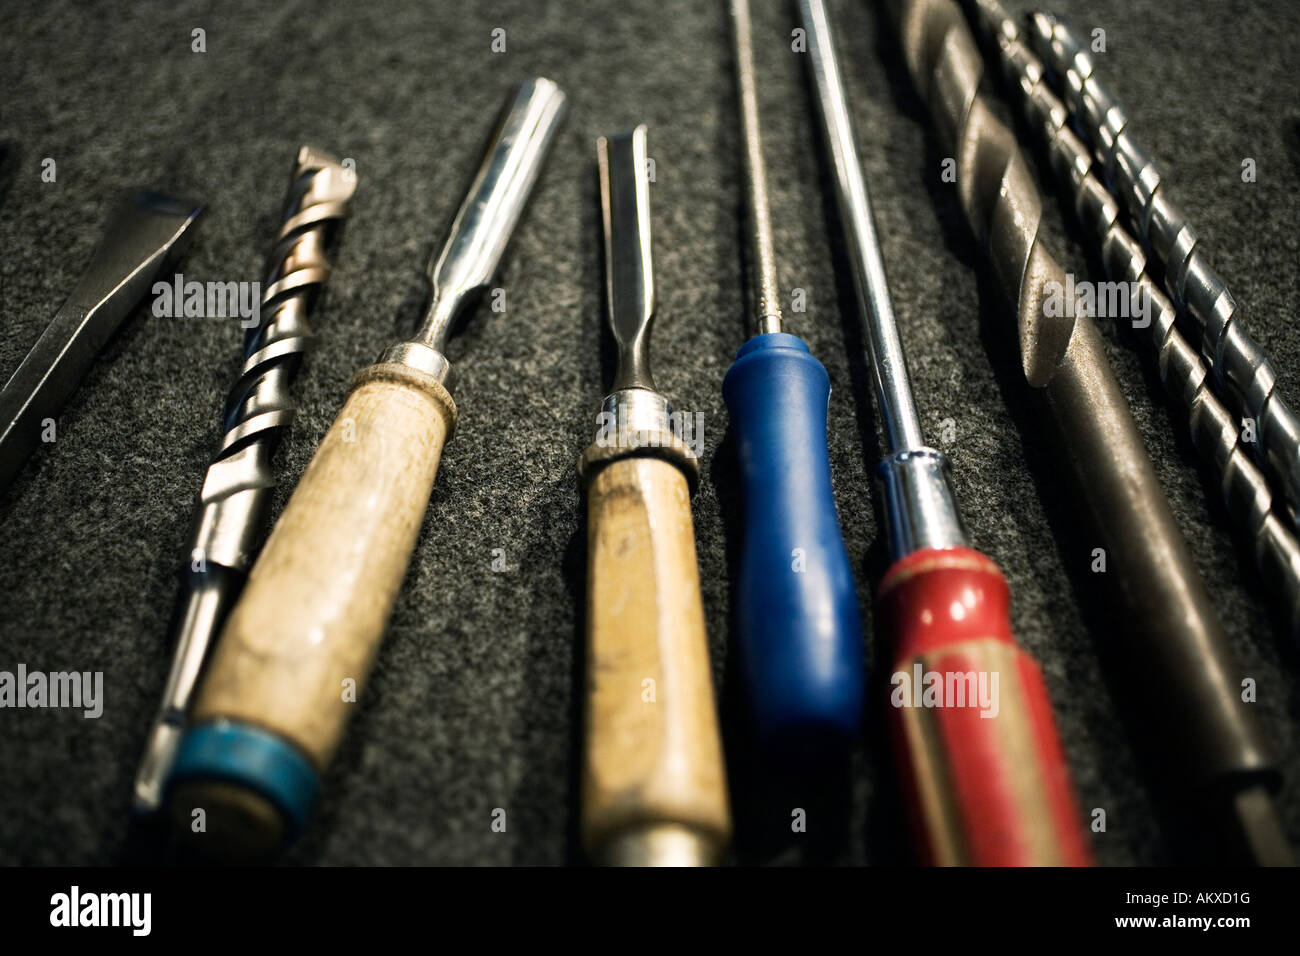 Woodworking and cutting tools Stock Photo